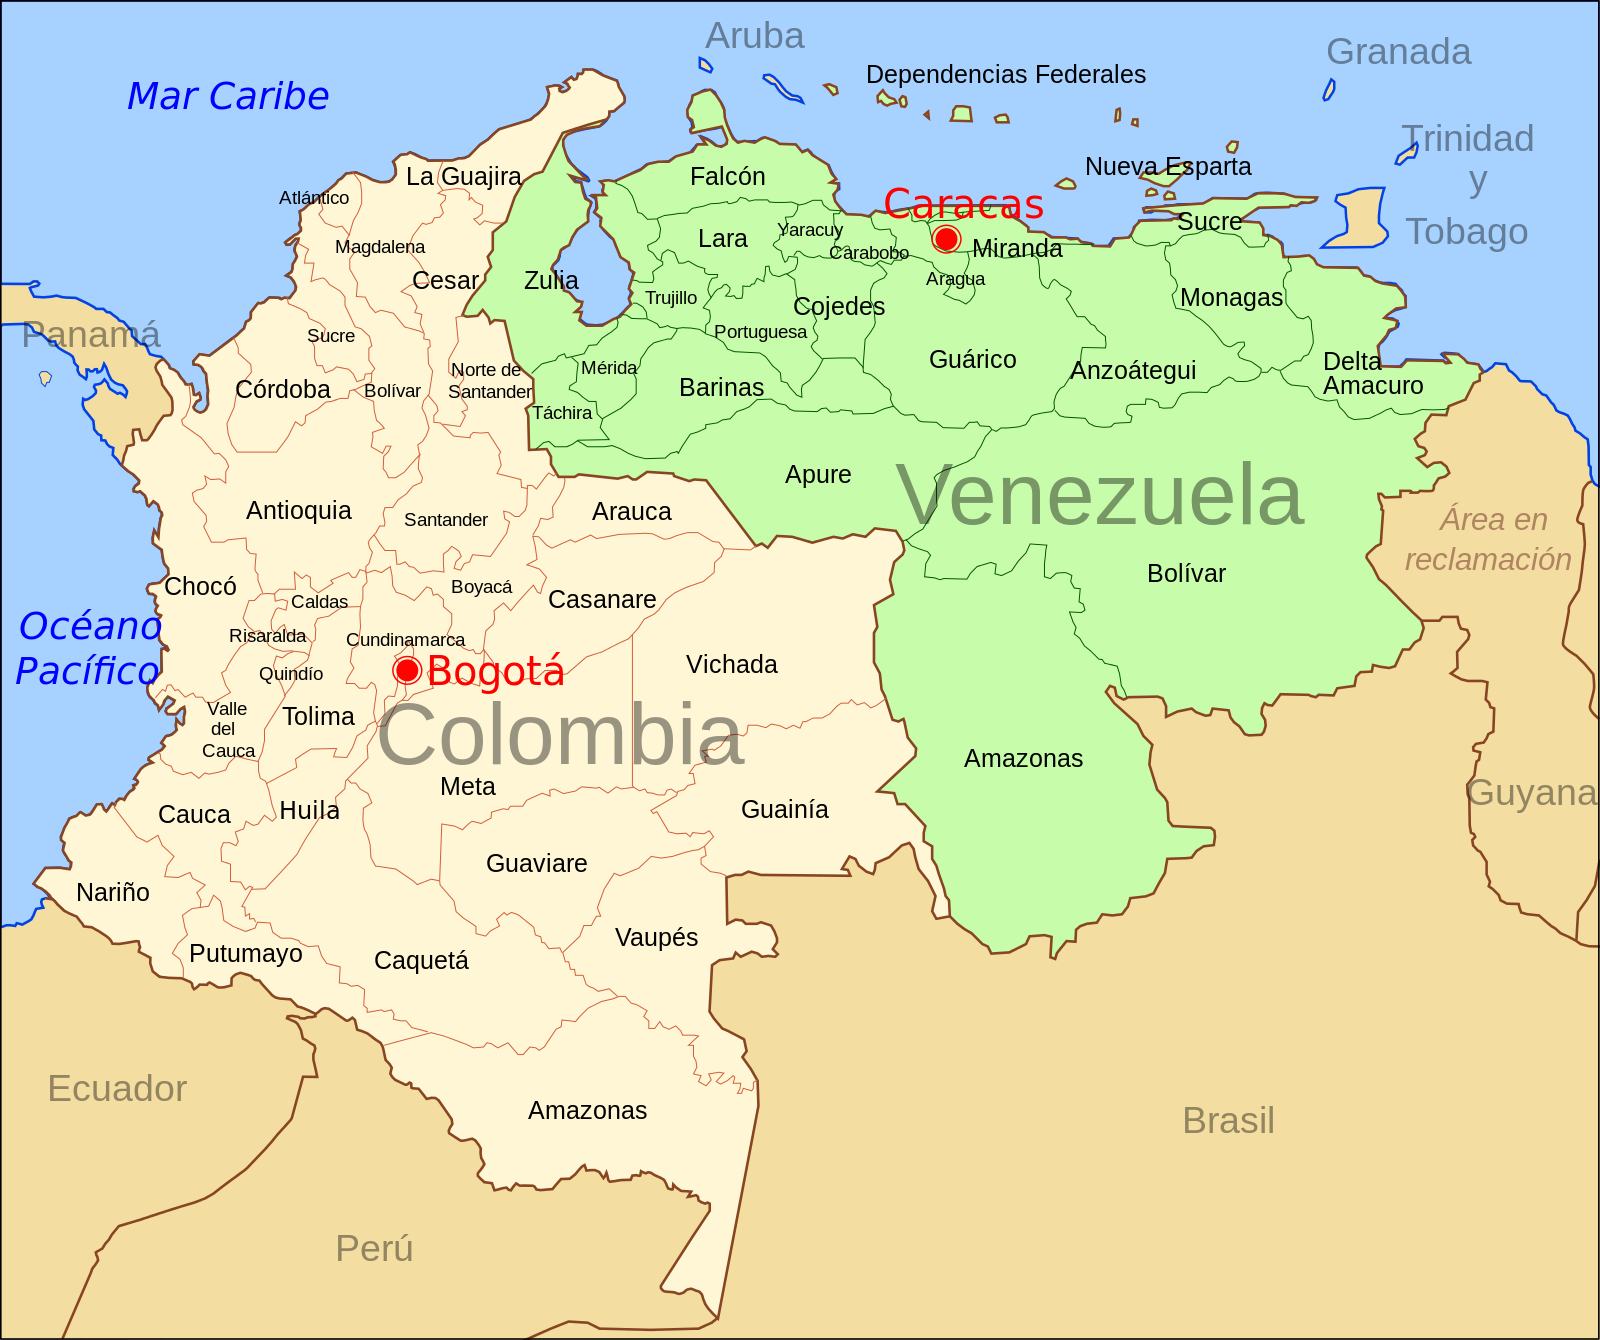 Resumption of relations between Venezuela and Colombia is a failure for the U.S., says expert. (Photo internet reproduction)